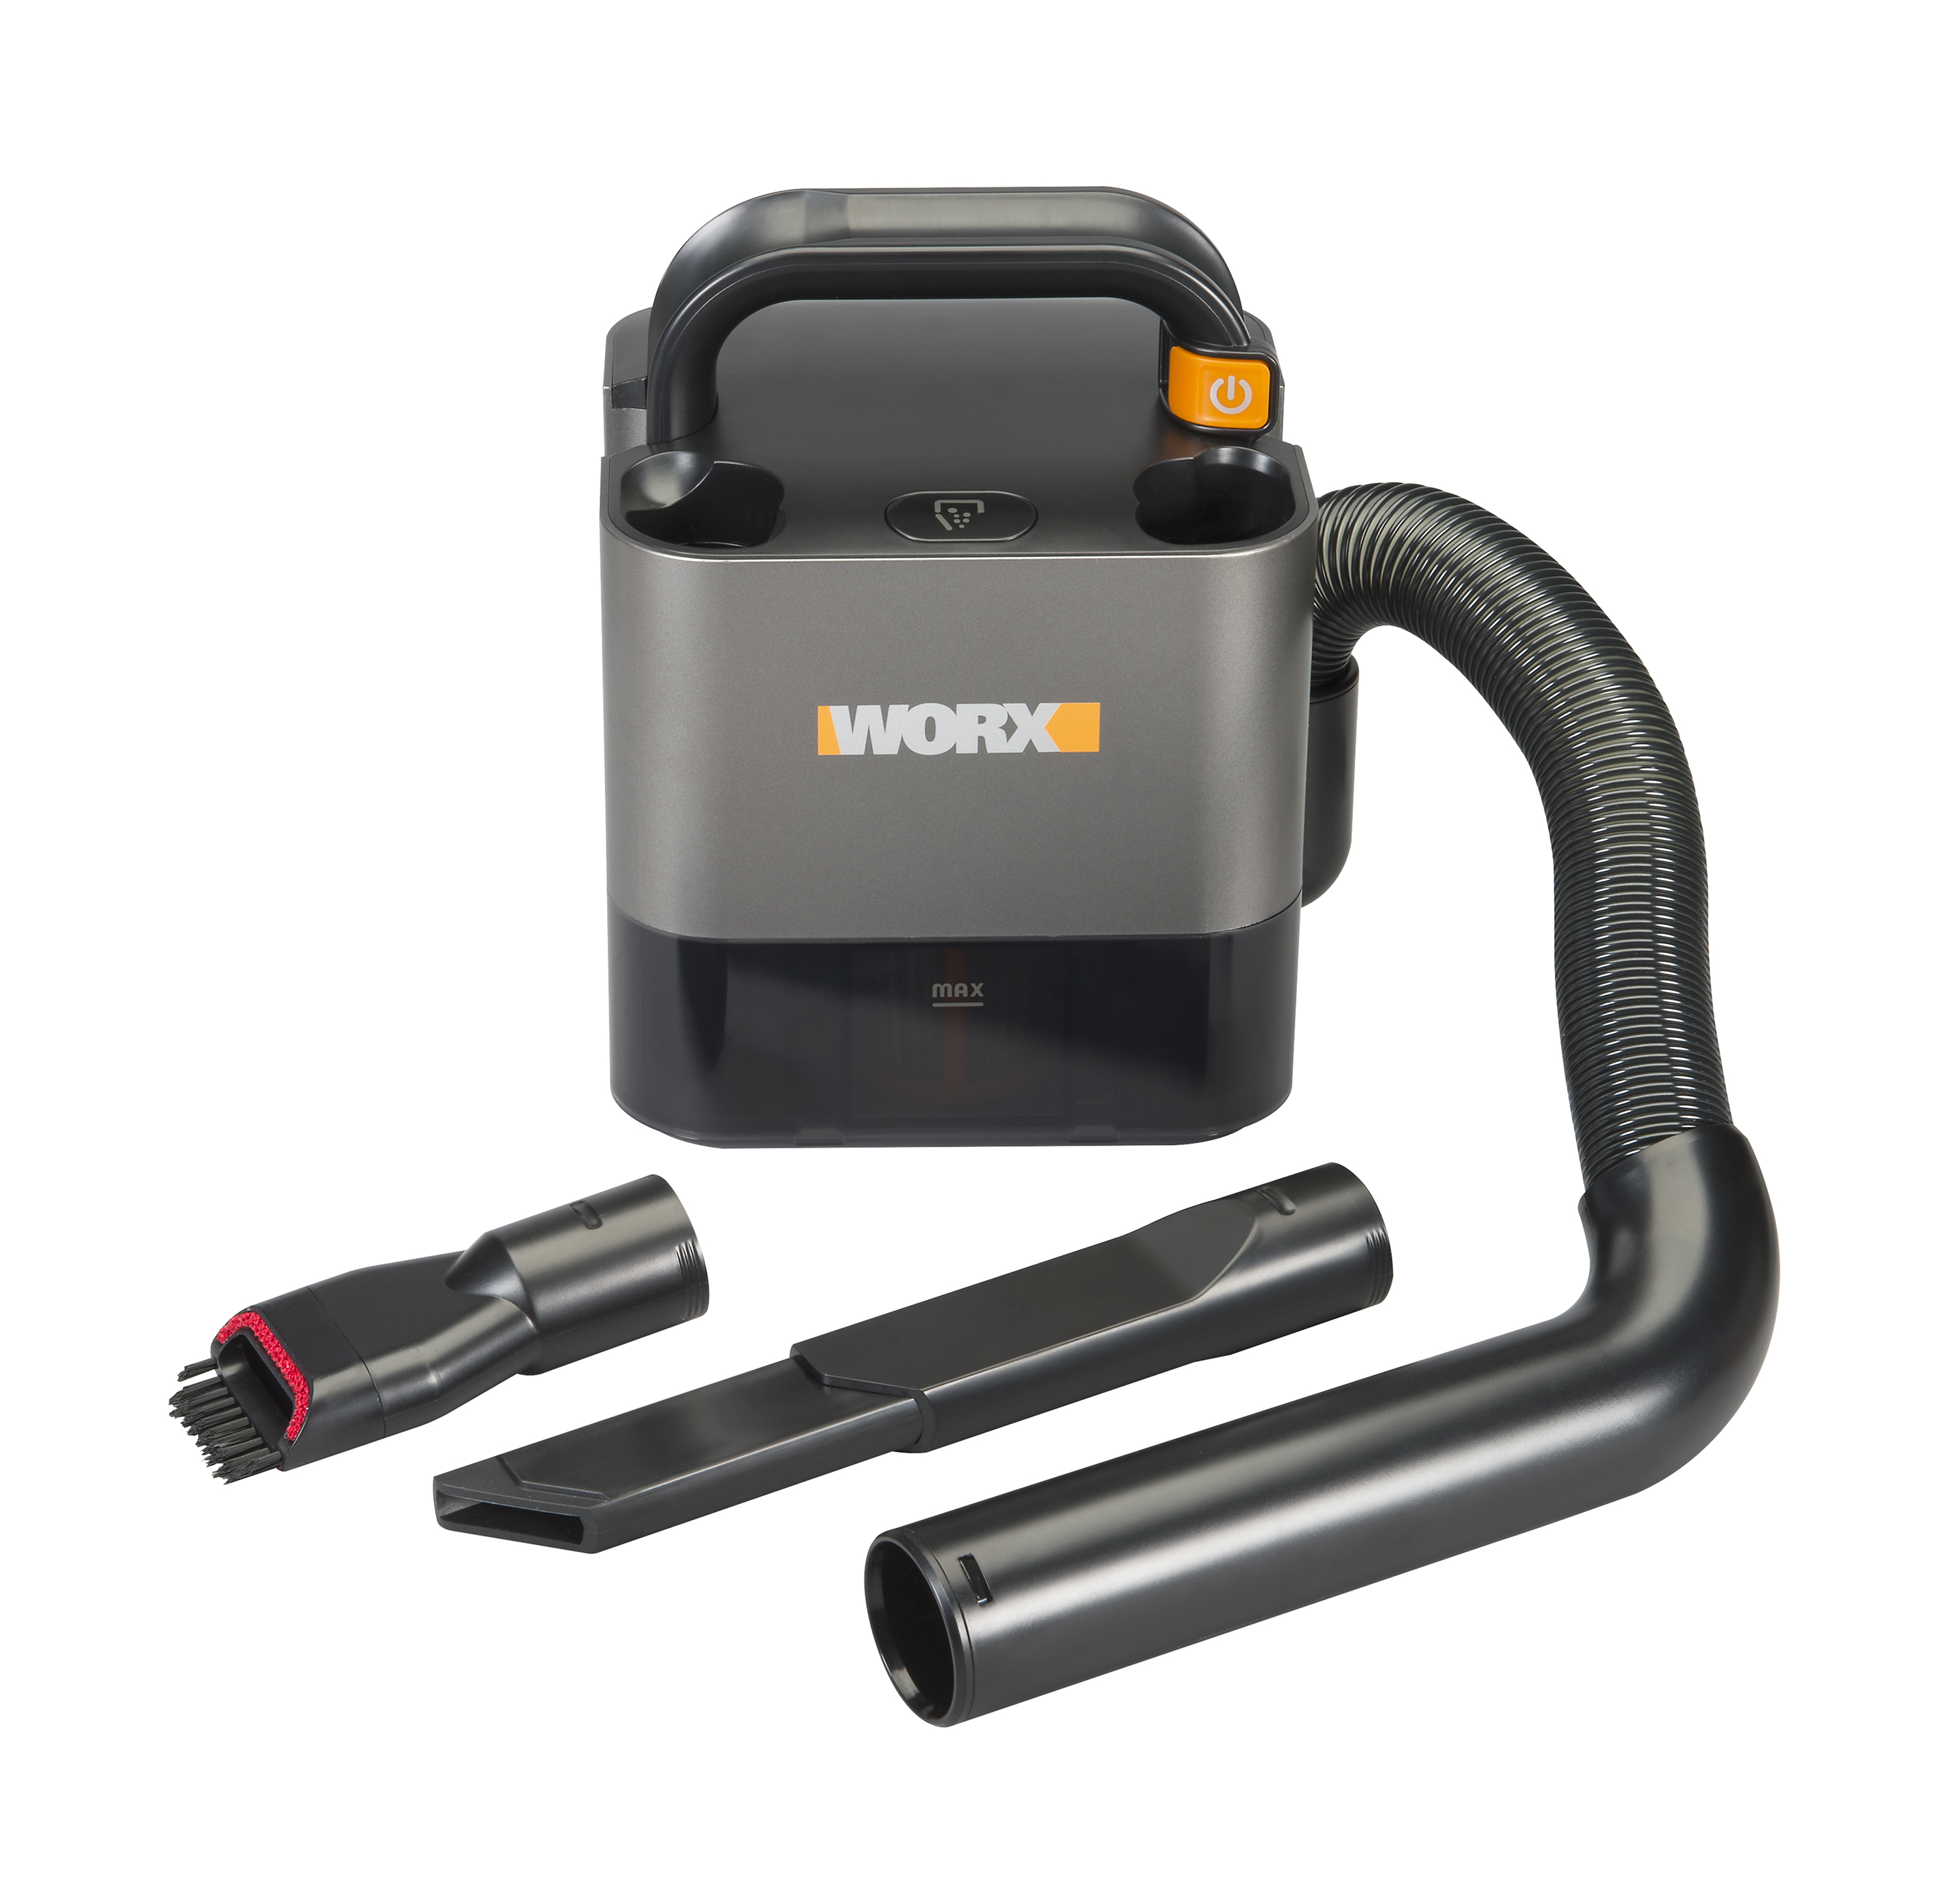 WORX 20V Power Share Portable Vacuum is constructed of durable nylon resin and features a 4-ft., flexible hose and built-in handle for easy transport.